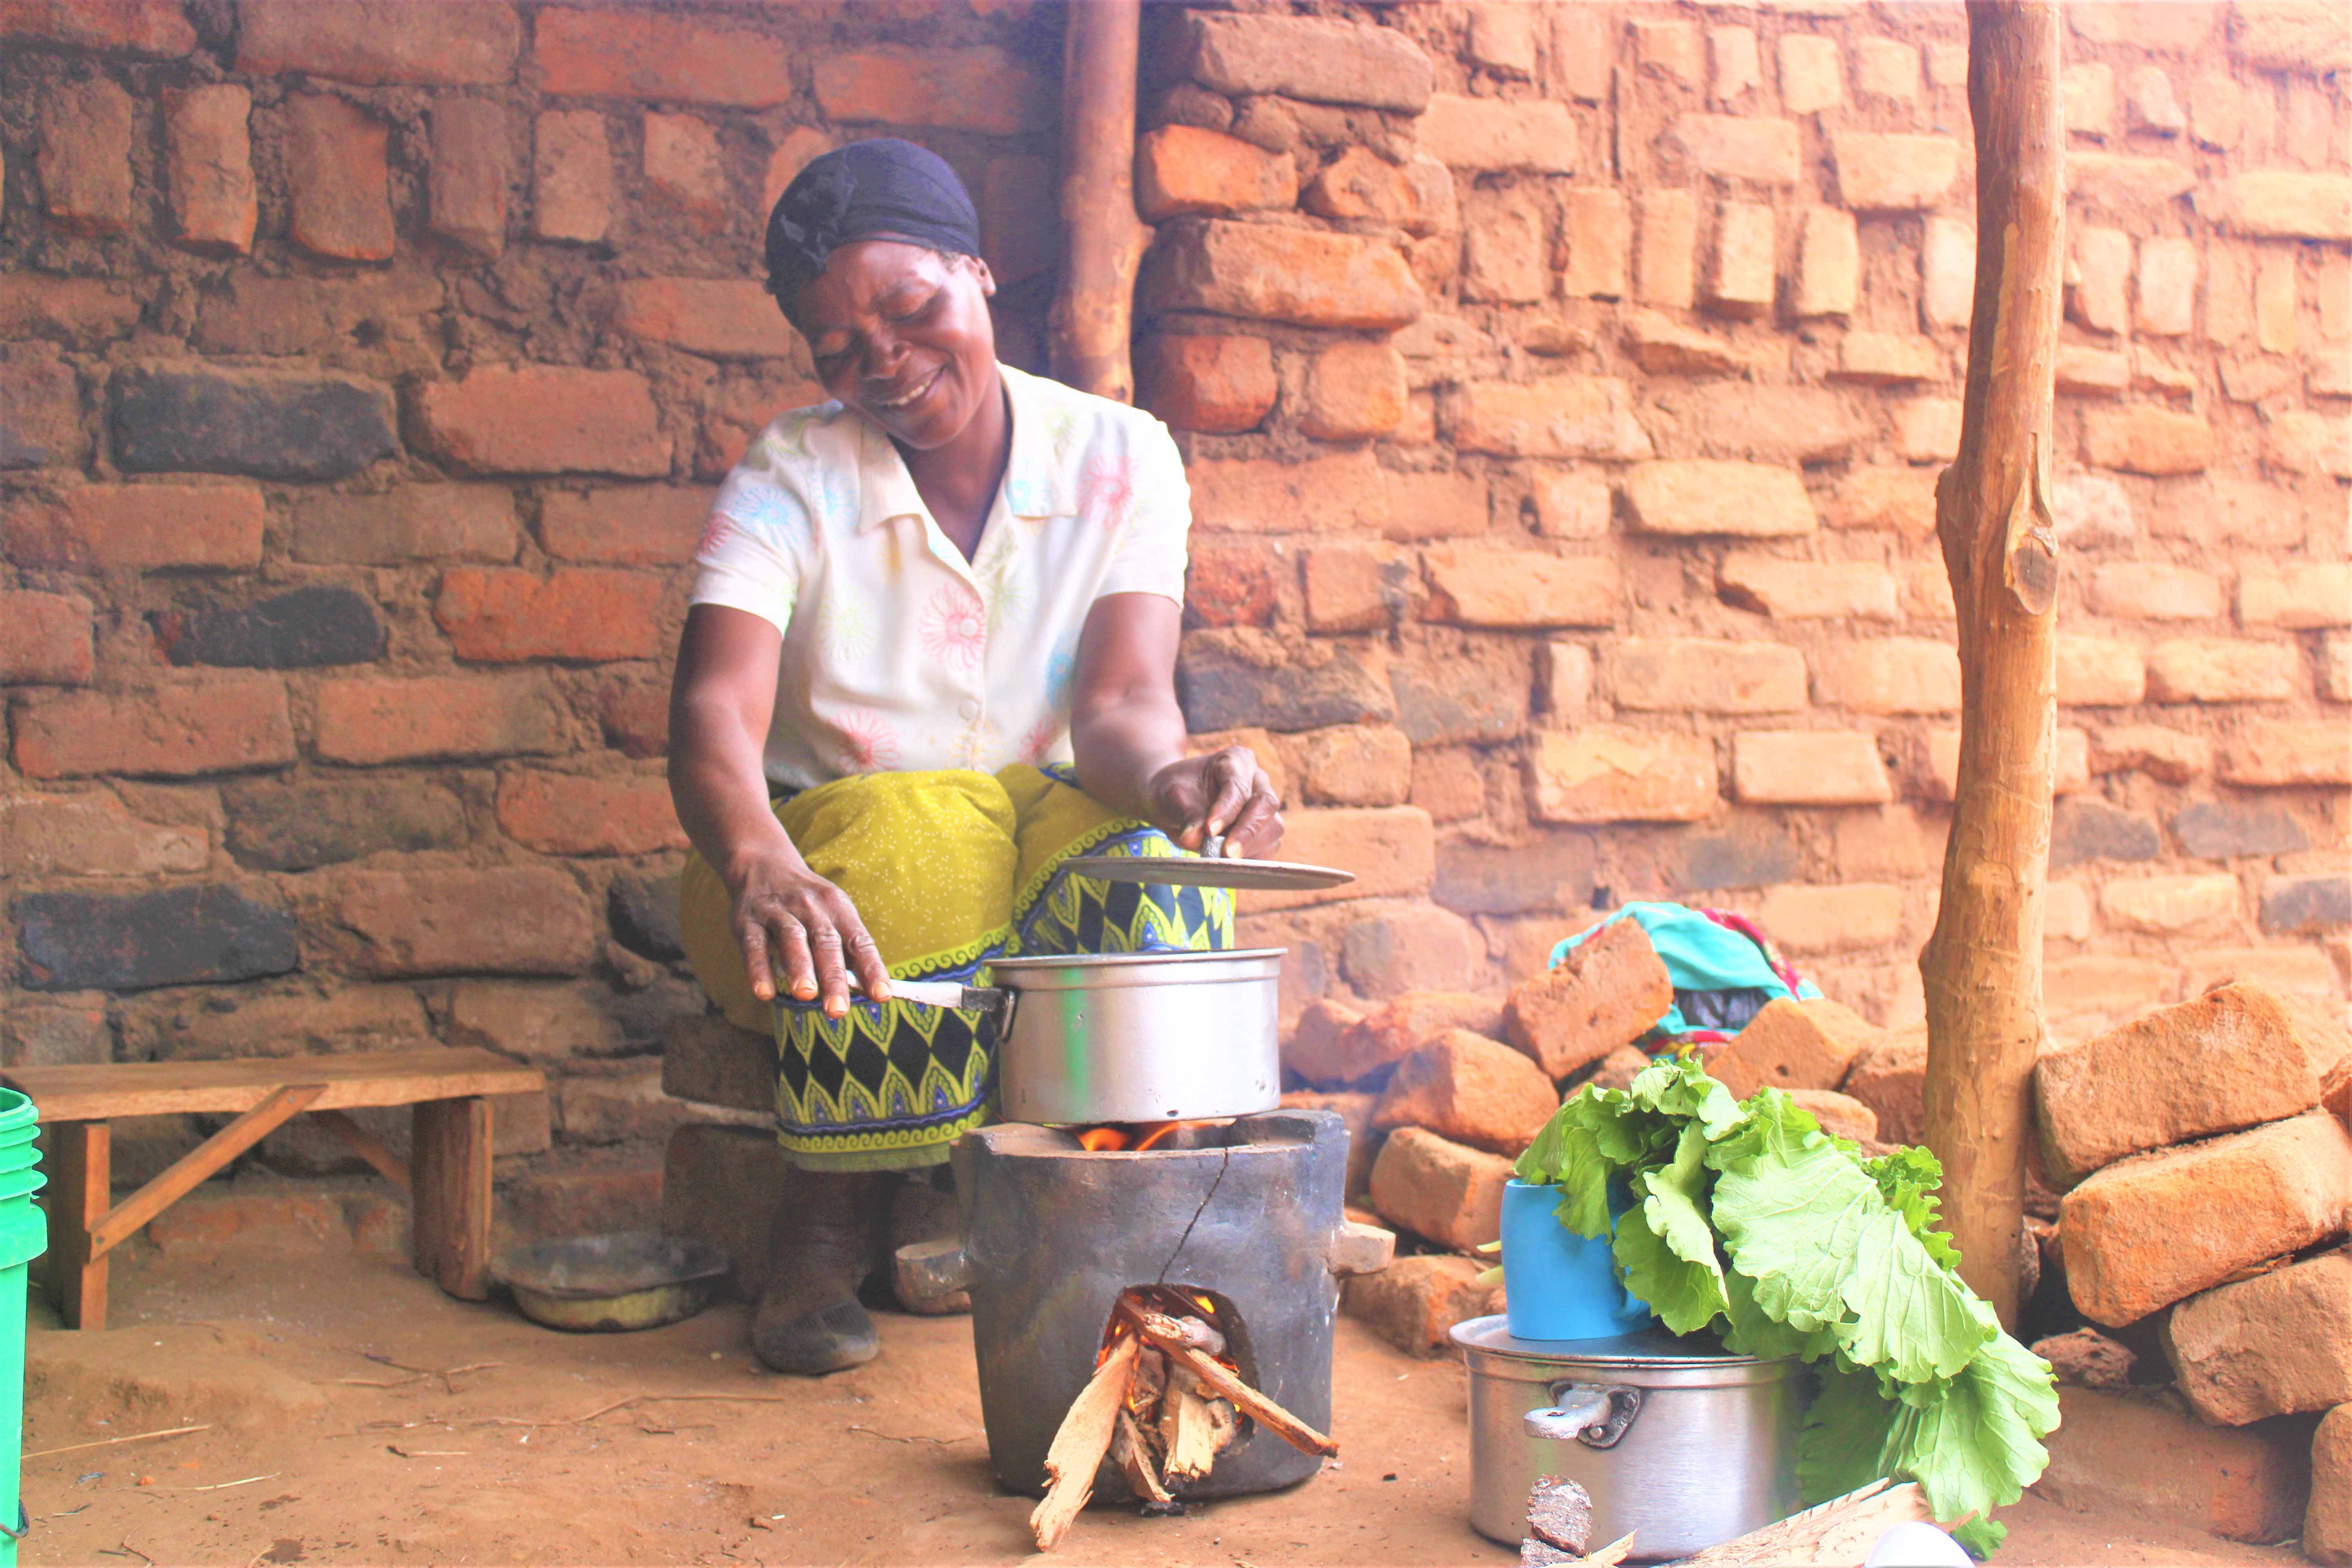 A community member smiles as she demonstrates the cookstove. Credit: Felix Malamula (PRIDE)